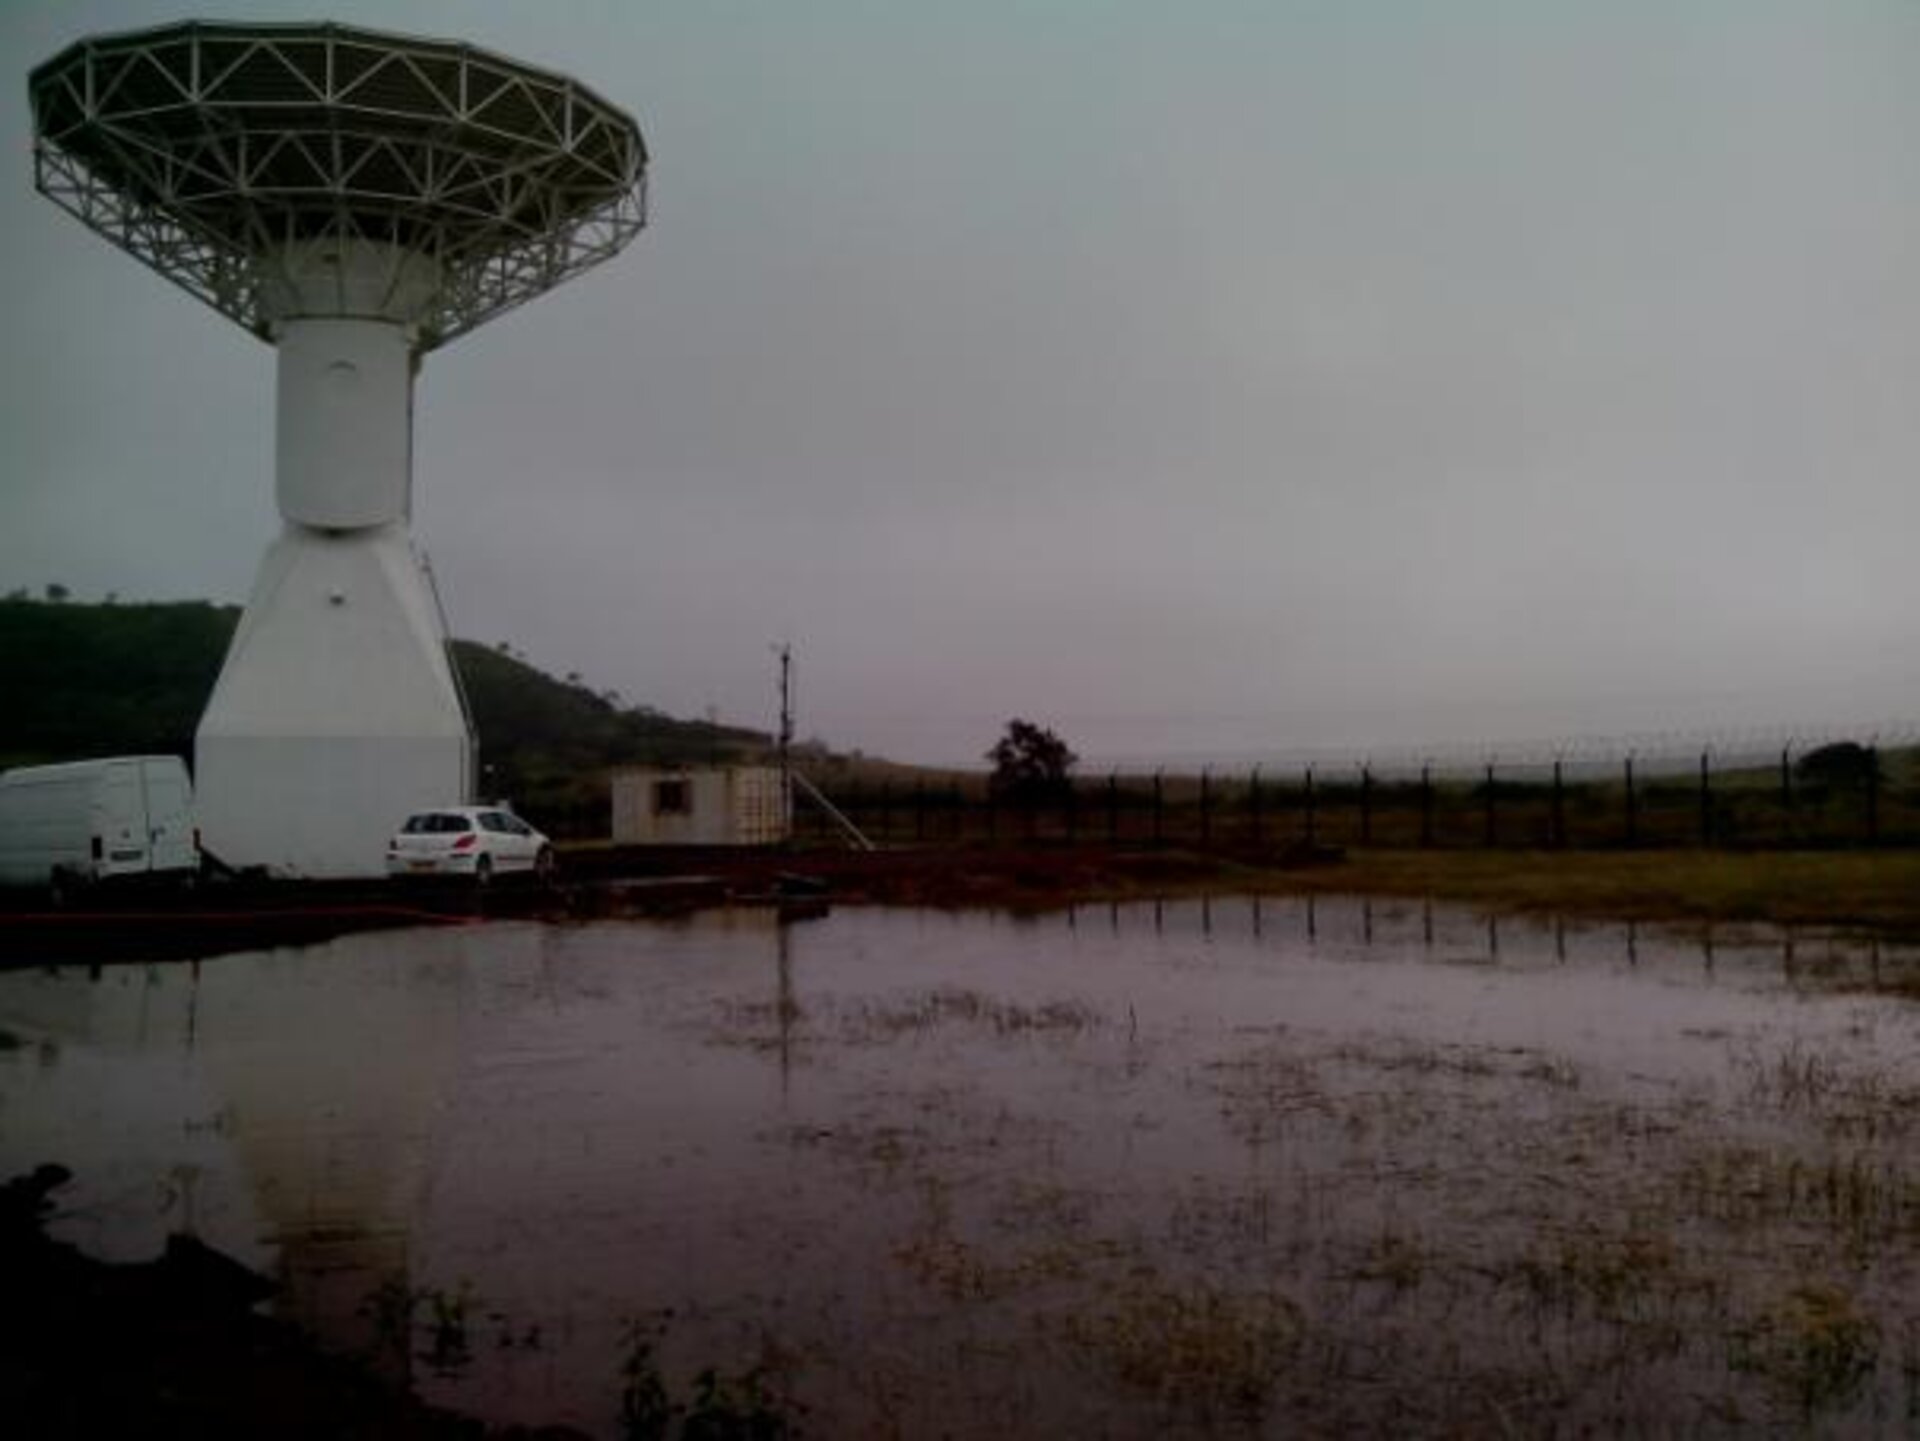 Ground station after the rain